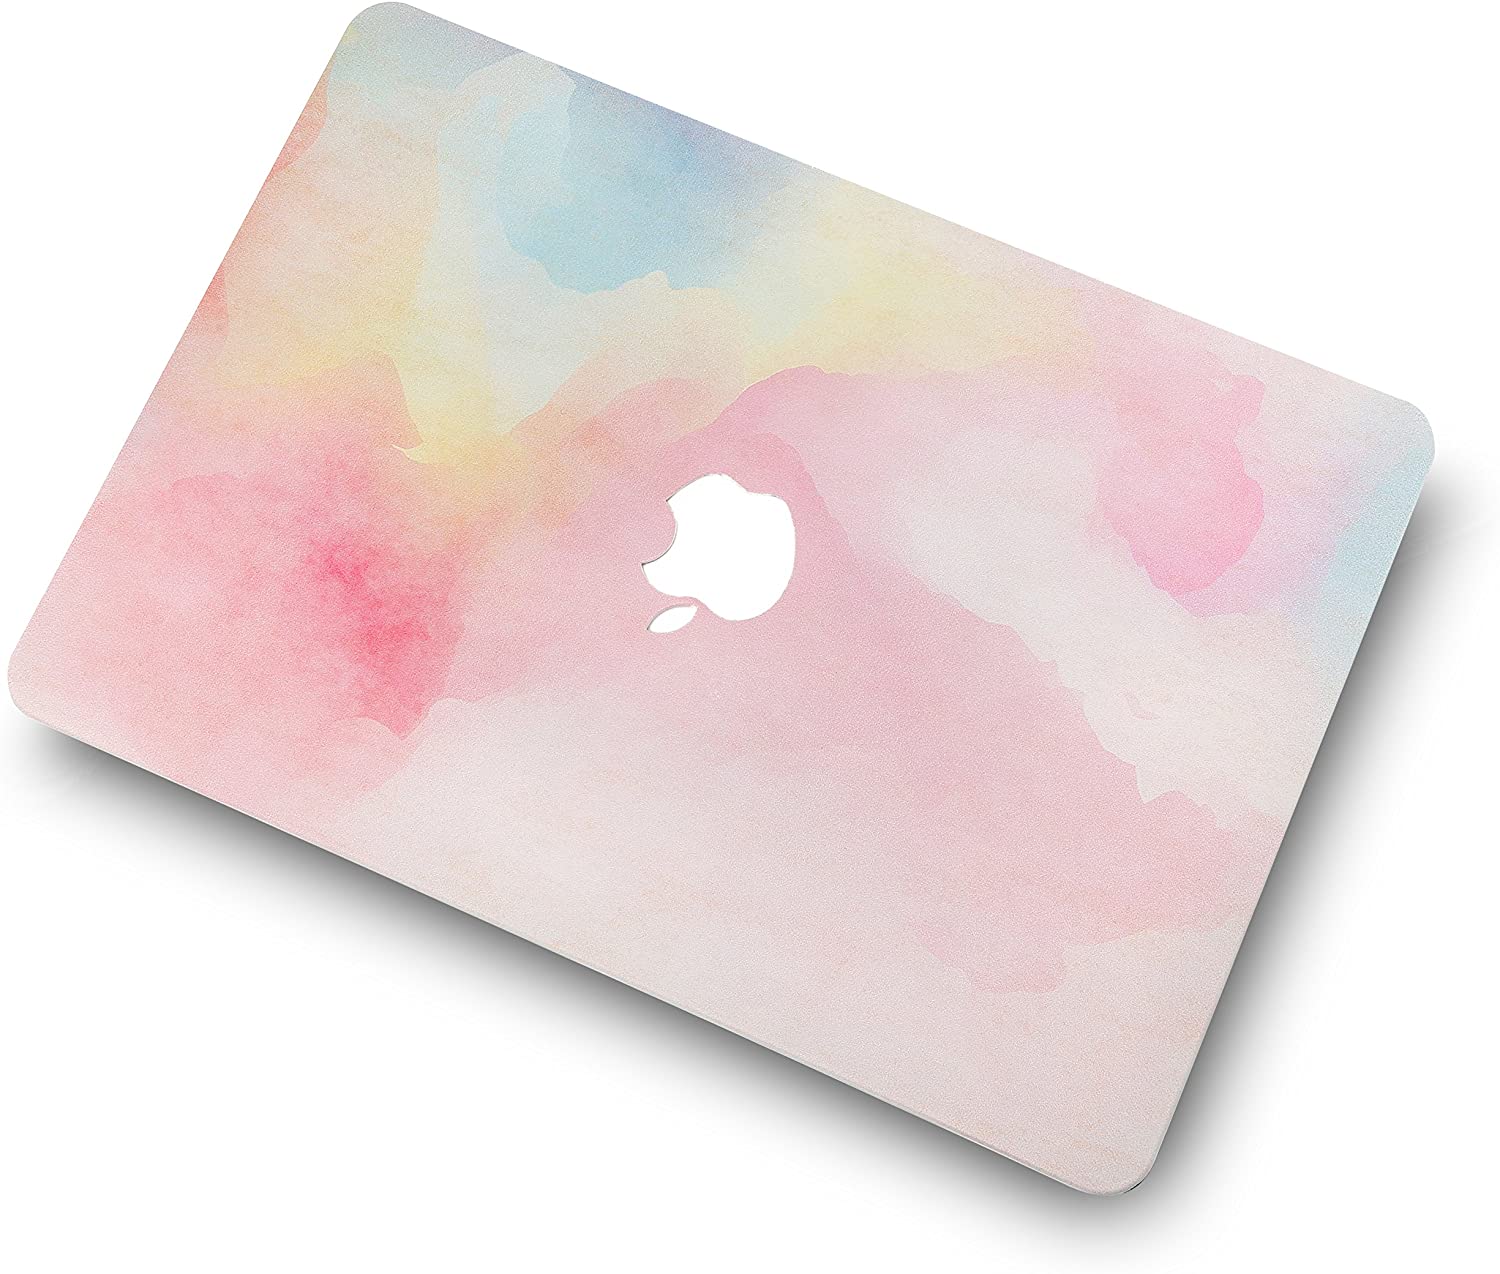 RAINBOW MIST -  MacBook Air 13 inch Case 2018 - 2020 Release. Plastic Pattern Hard Shell  Only Compatible with MacBook Air 13. - e4cents